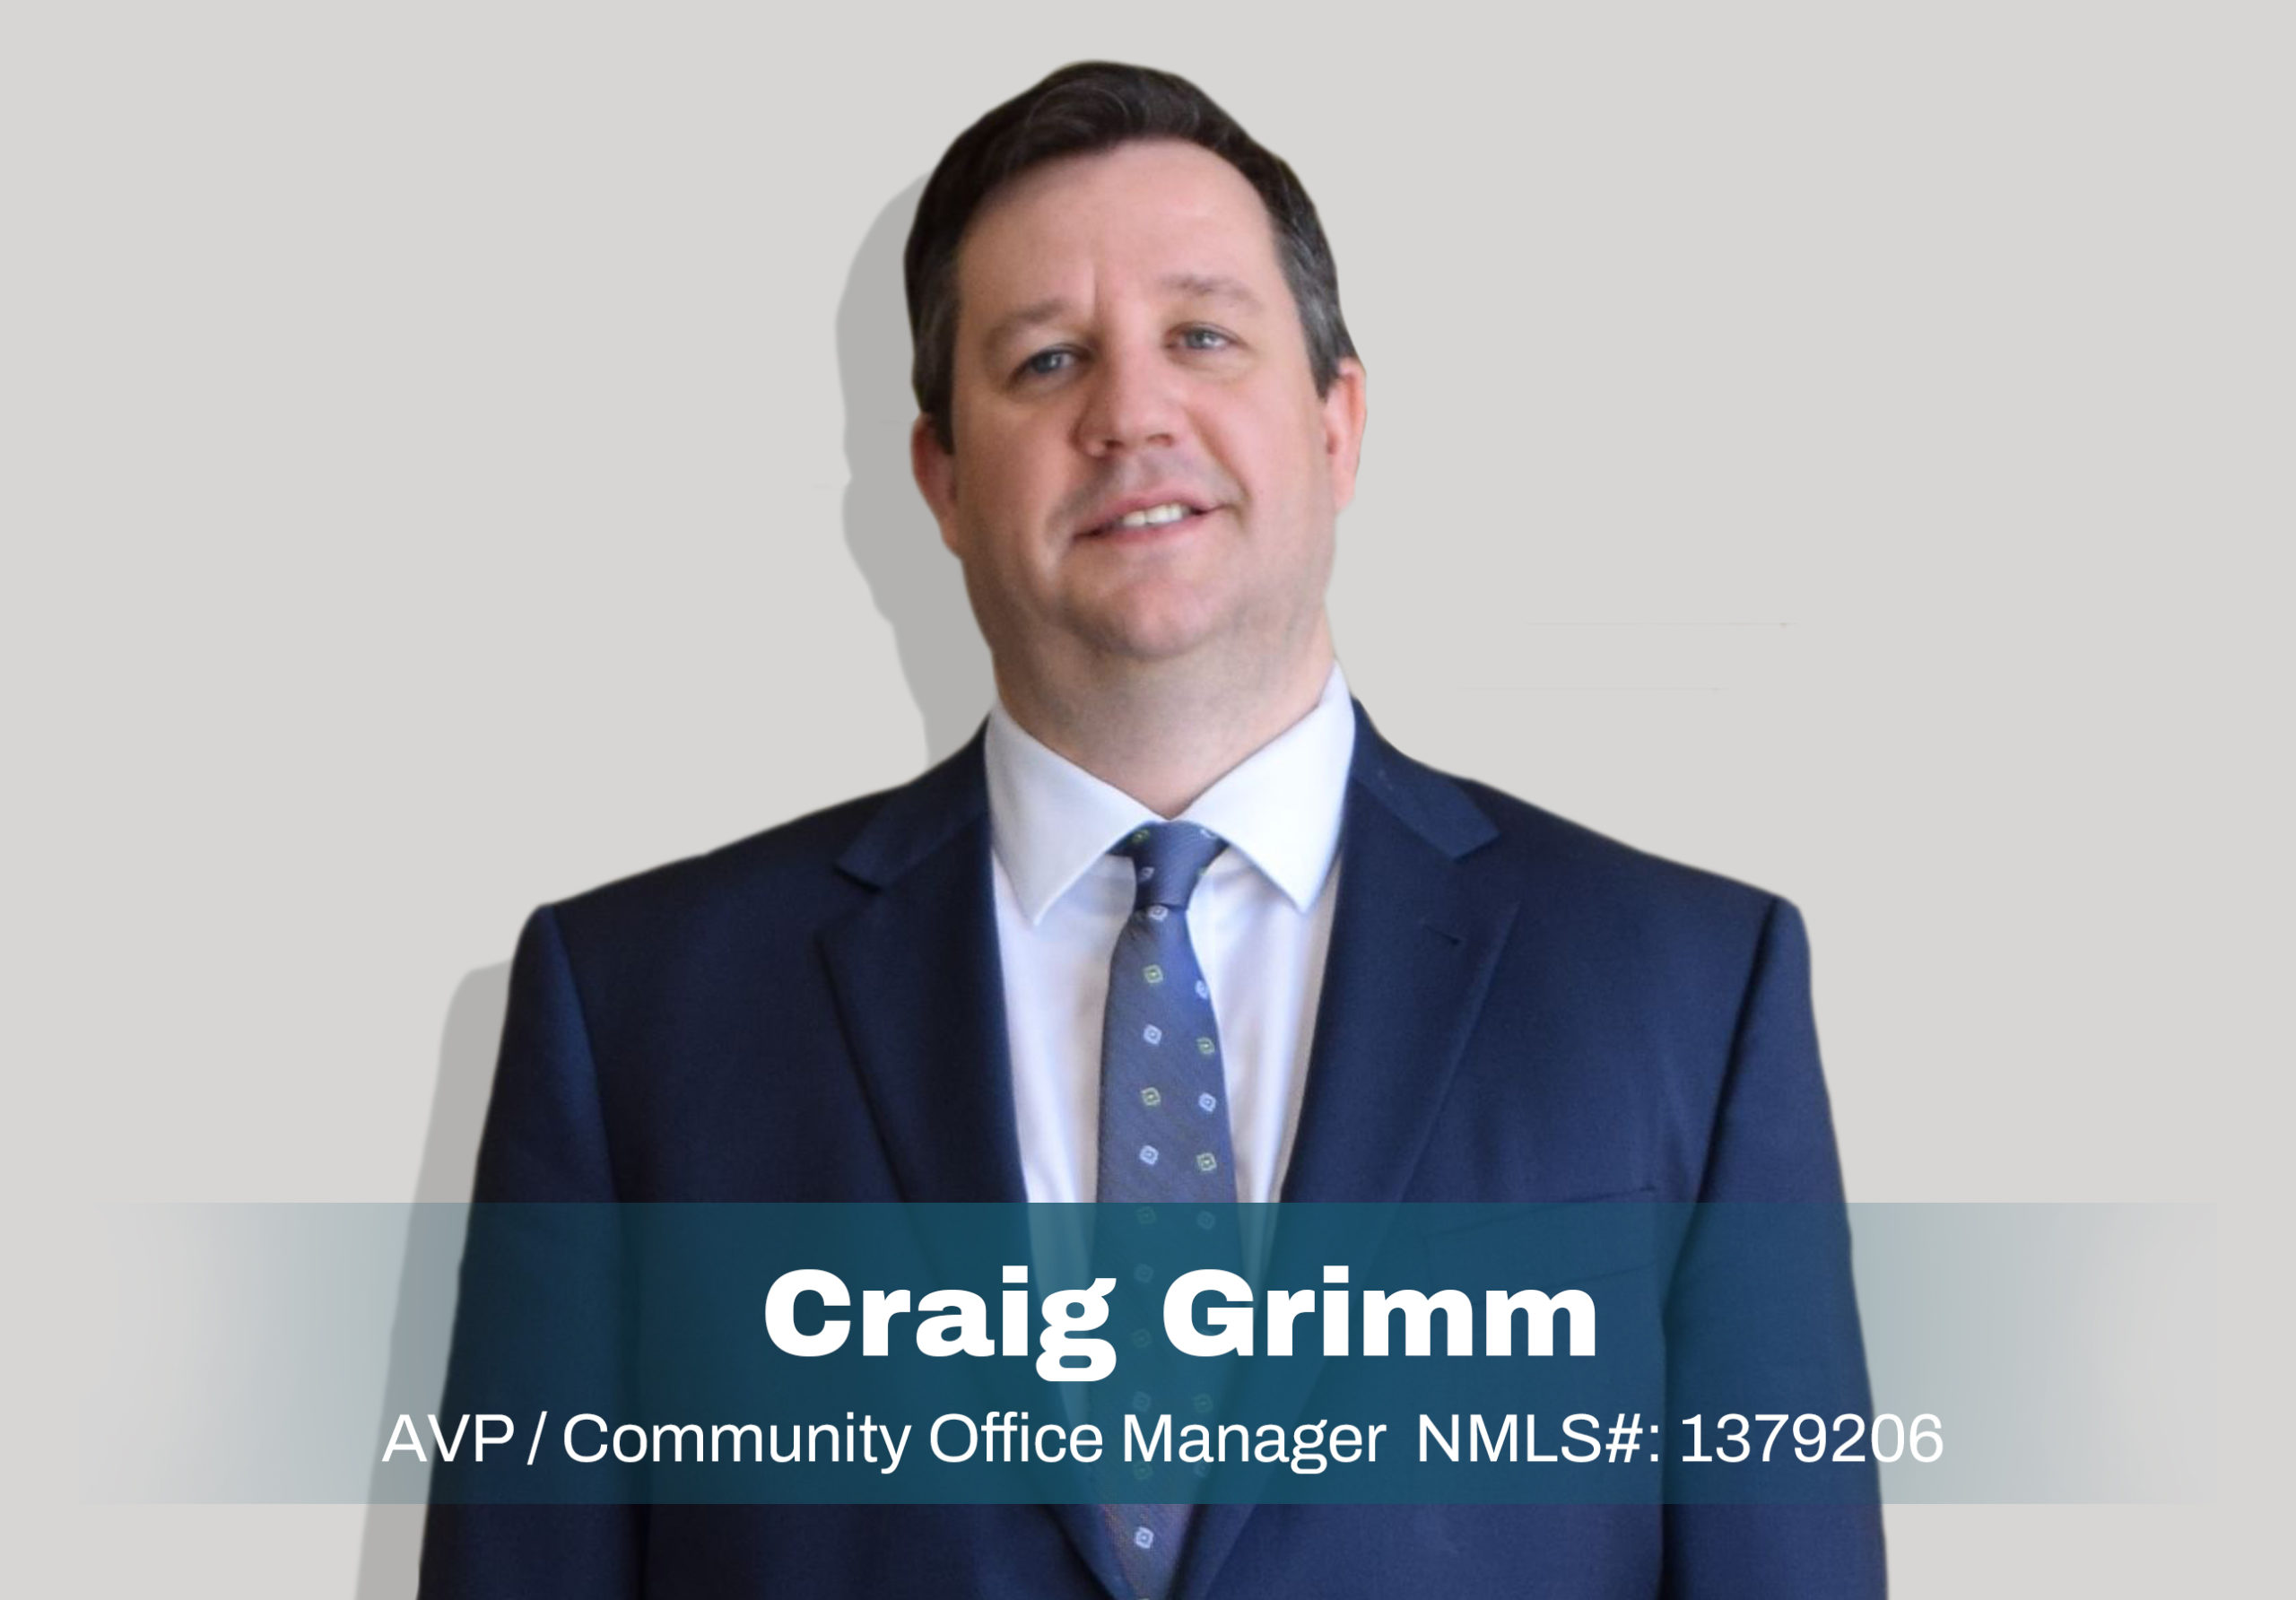 Craig Grimm - Assistant Vice President and Community Office Manager - Waymart - NMLS # 1379206